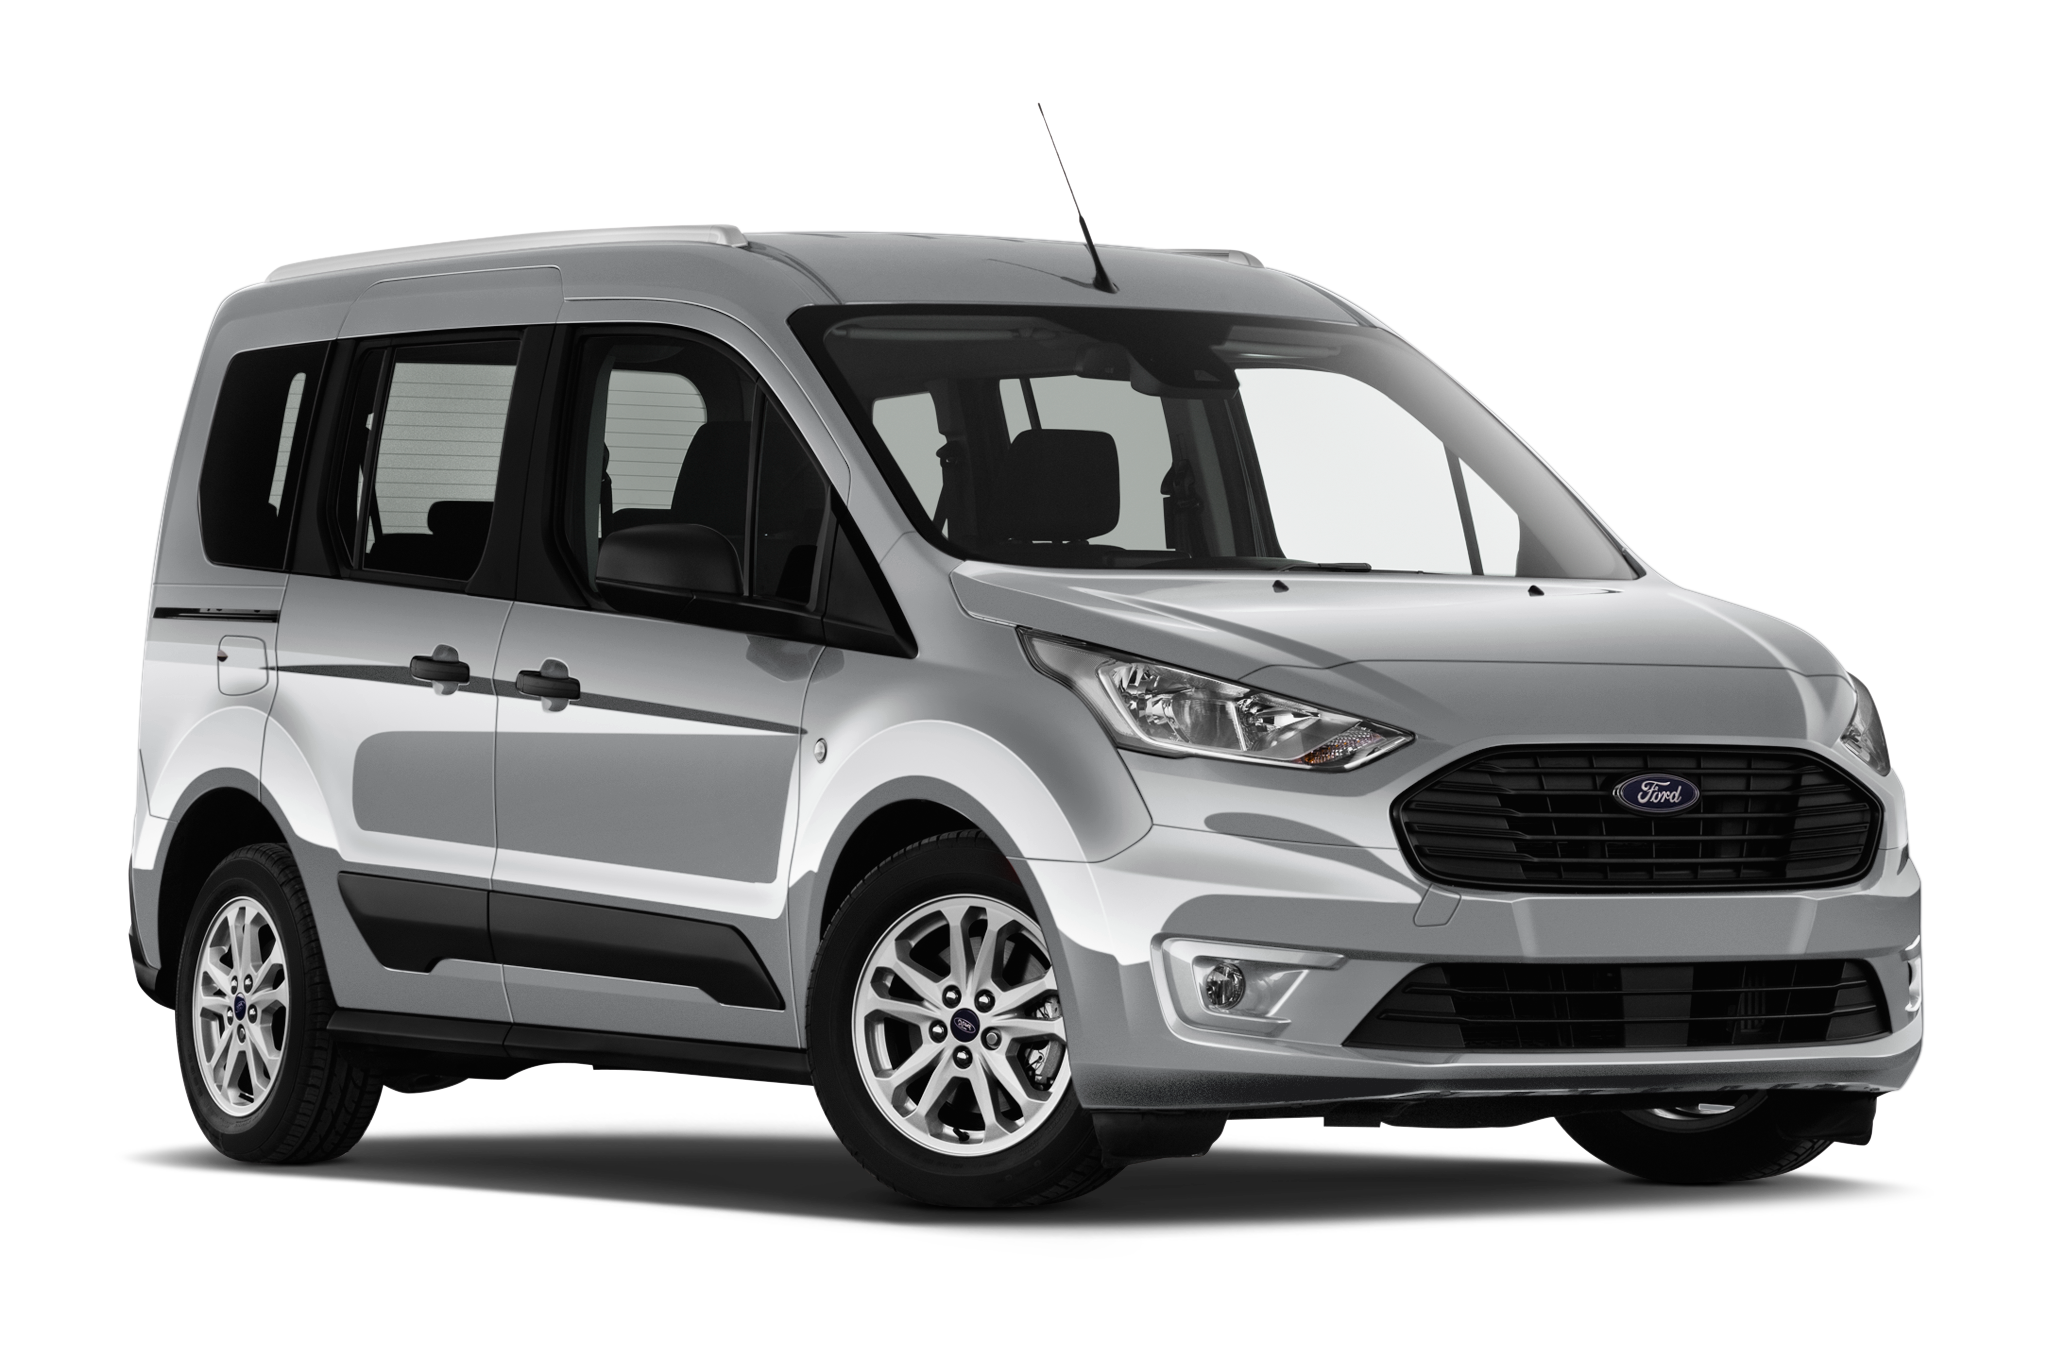 Ford Tourneo Connect Lease deals from 